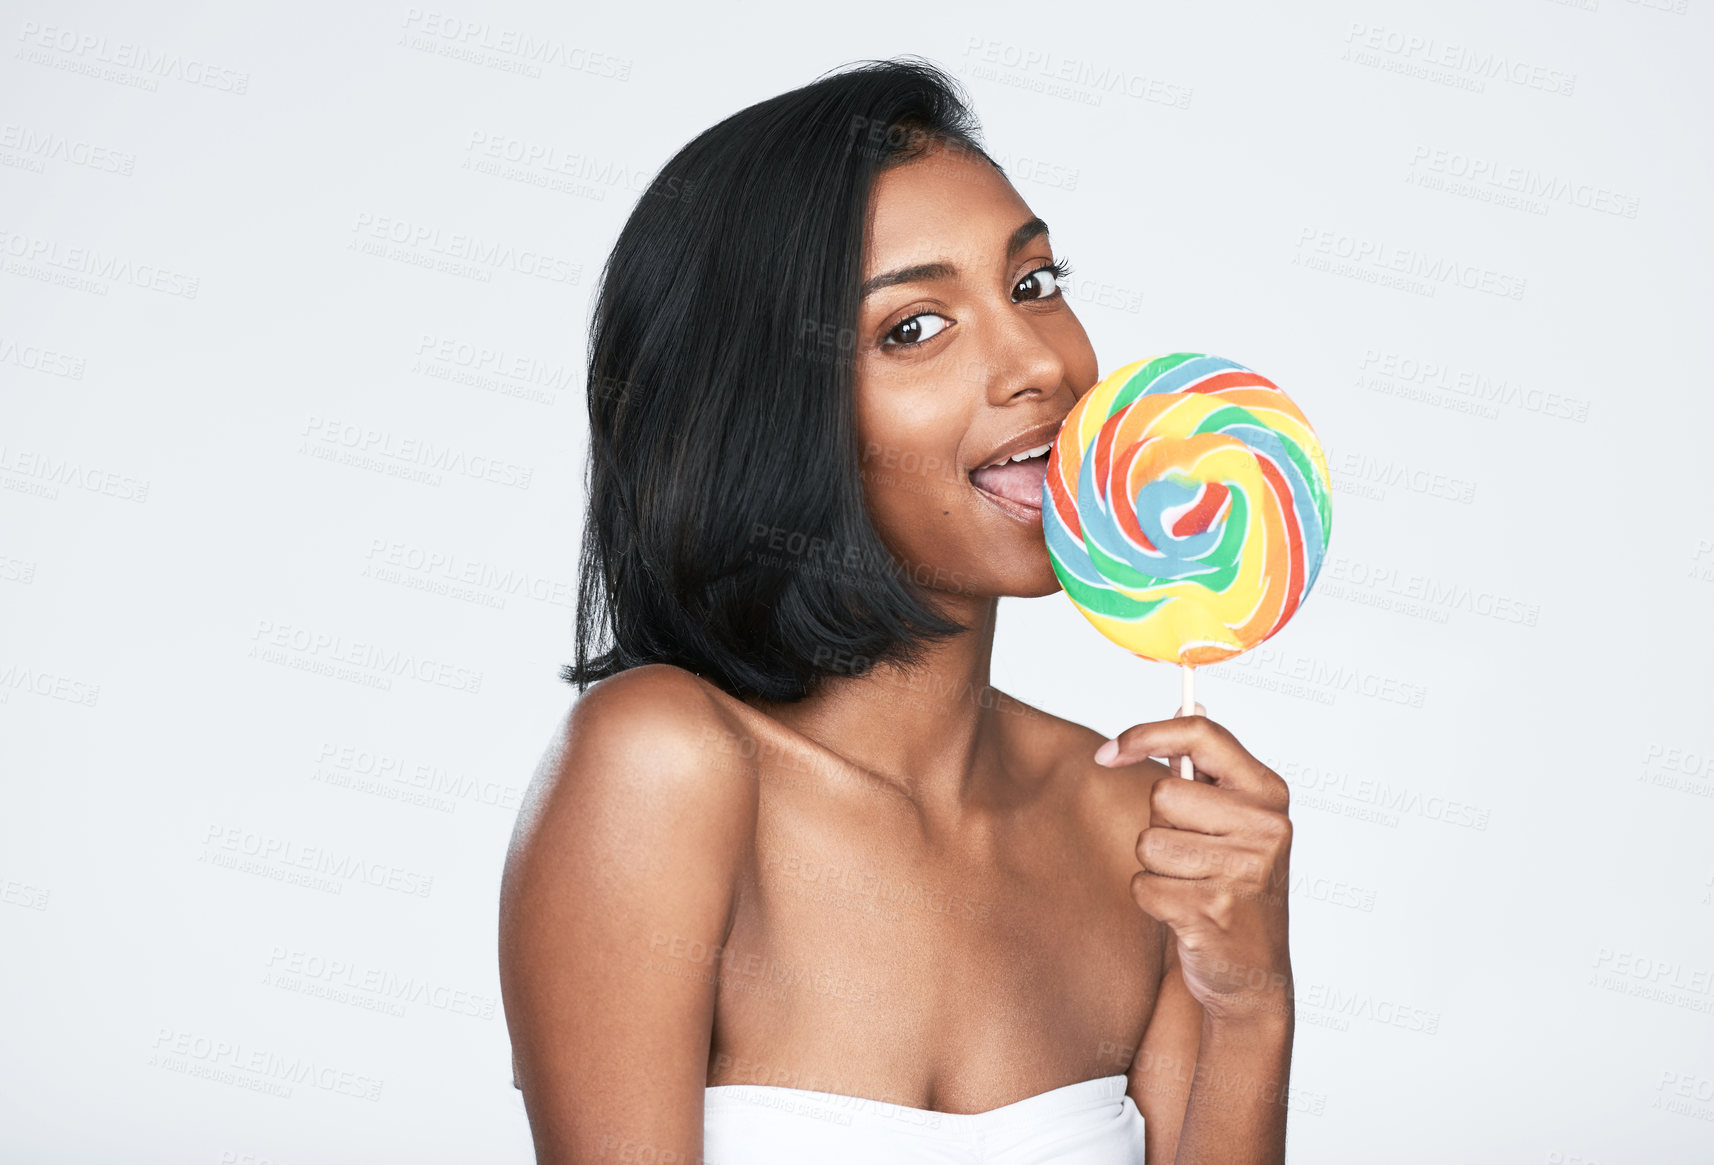 Buy stock photo Cropped shot of a beautiful woman holding a rainbow lollipop against a white background